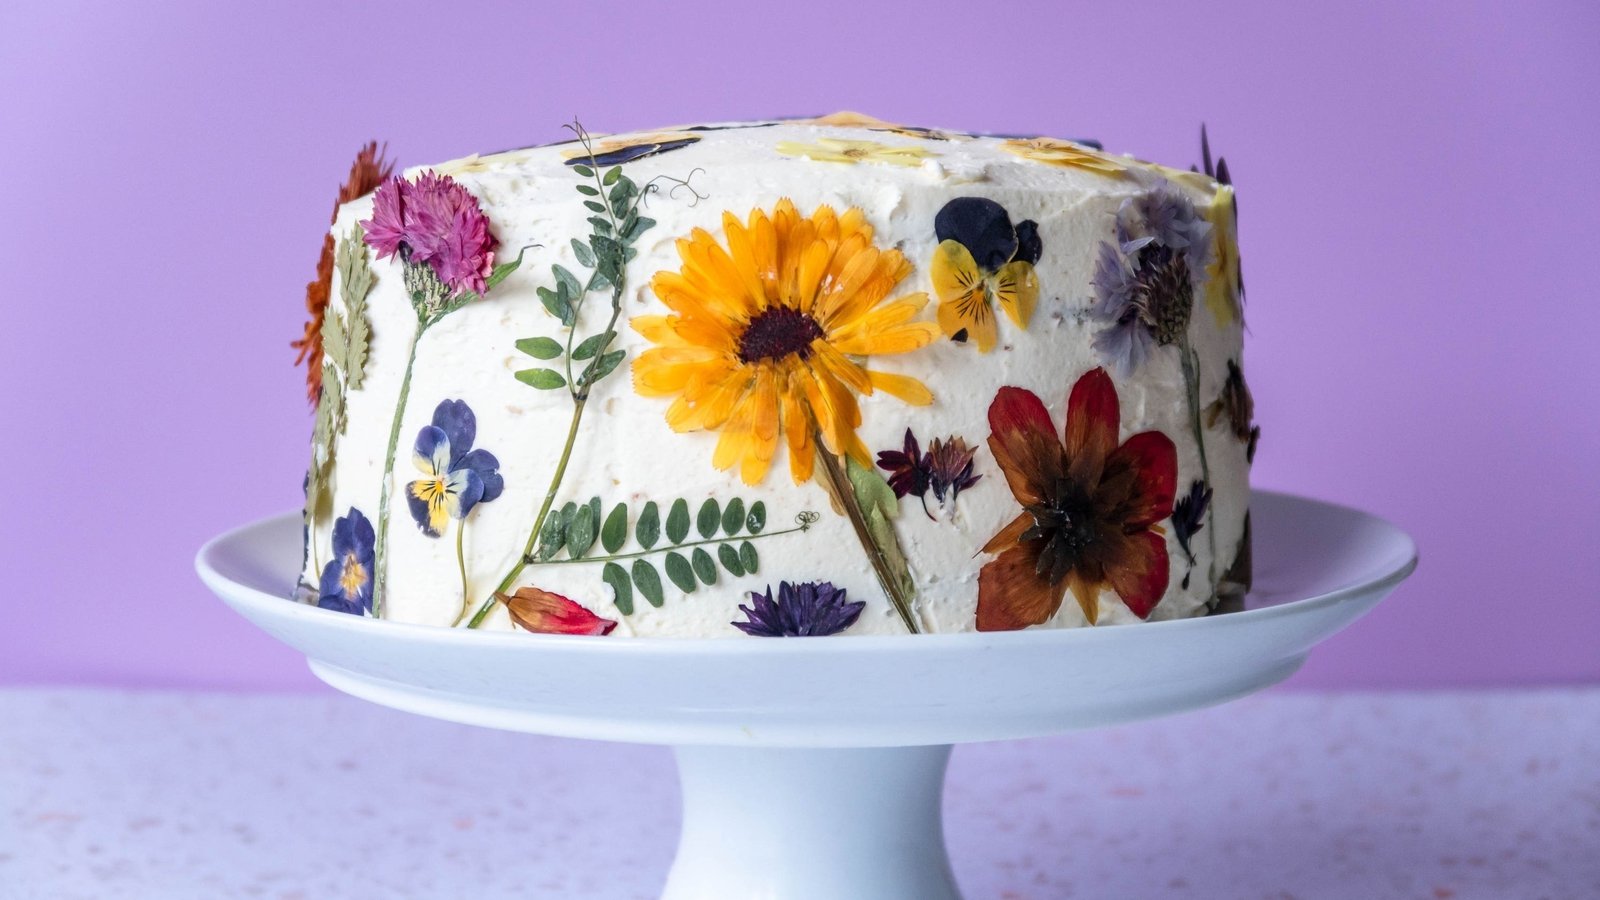 Tips on creative ways to use Edible Flowers for Cakes